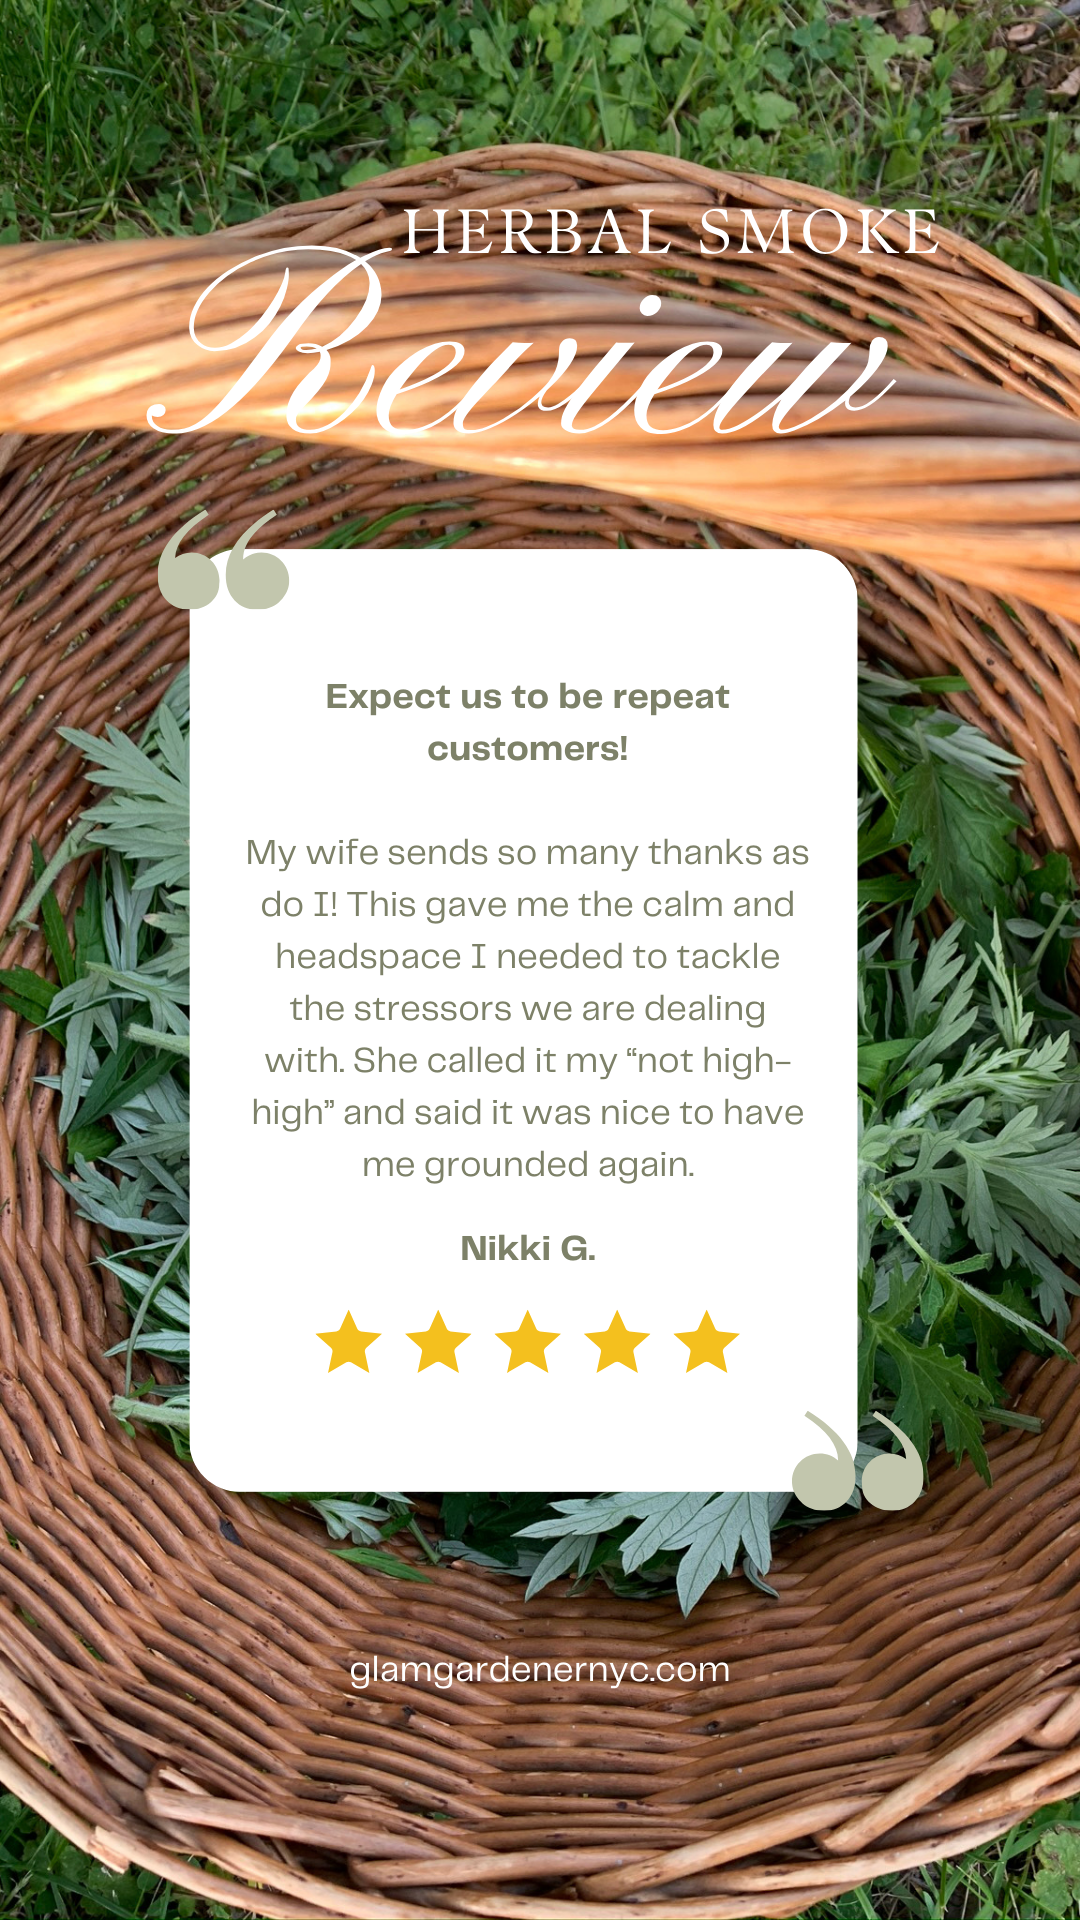 Expect us to be repeat customers. Review of glam gardener herbal smoke blend with mullein, mugwort, mint and sage handcrafted in new york organic.